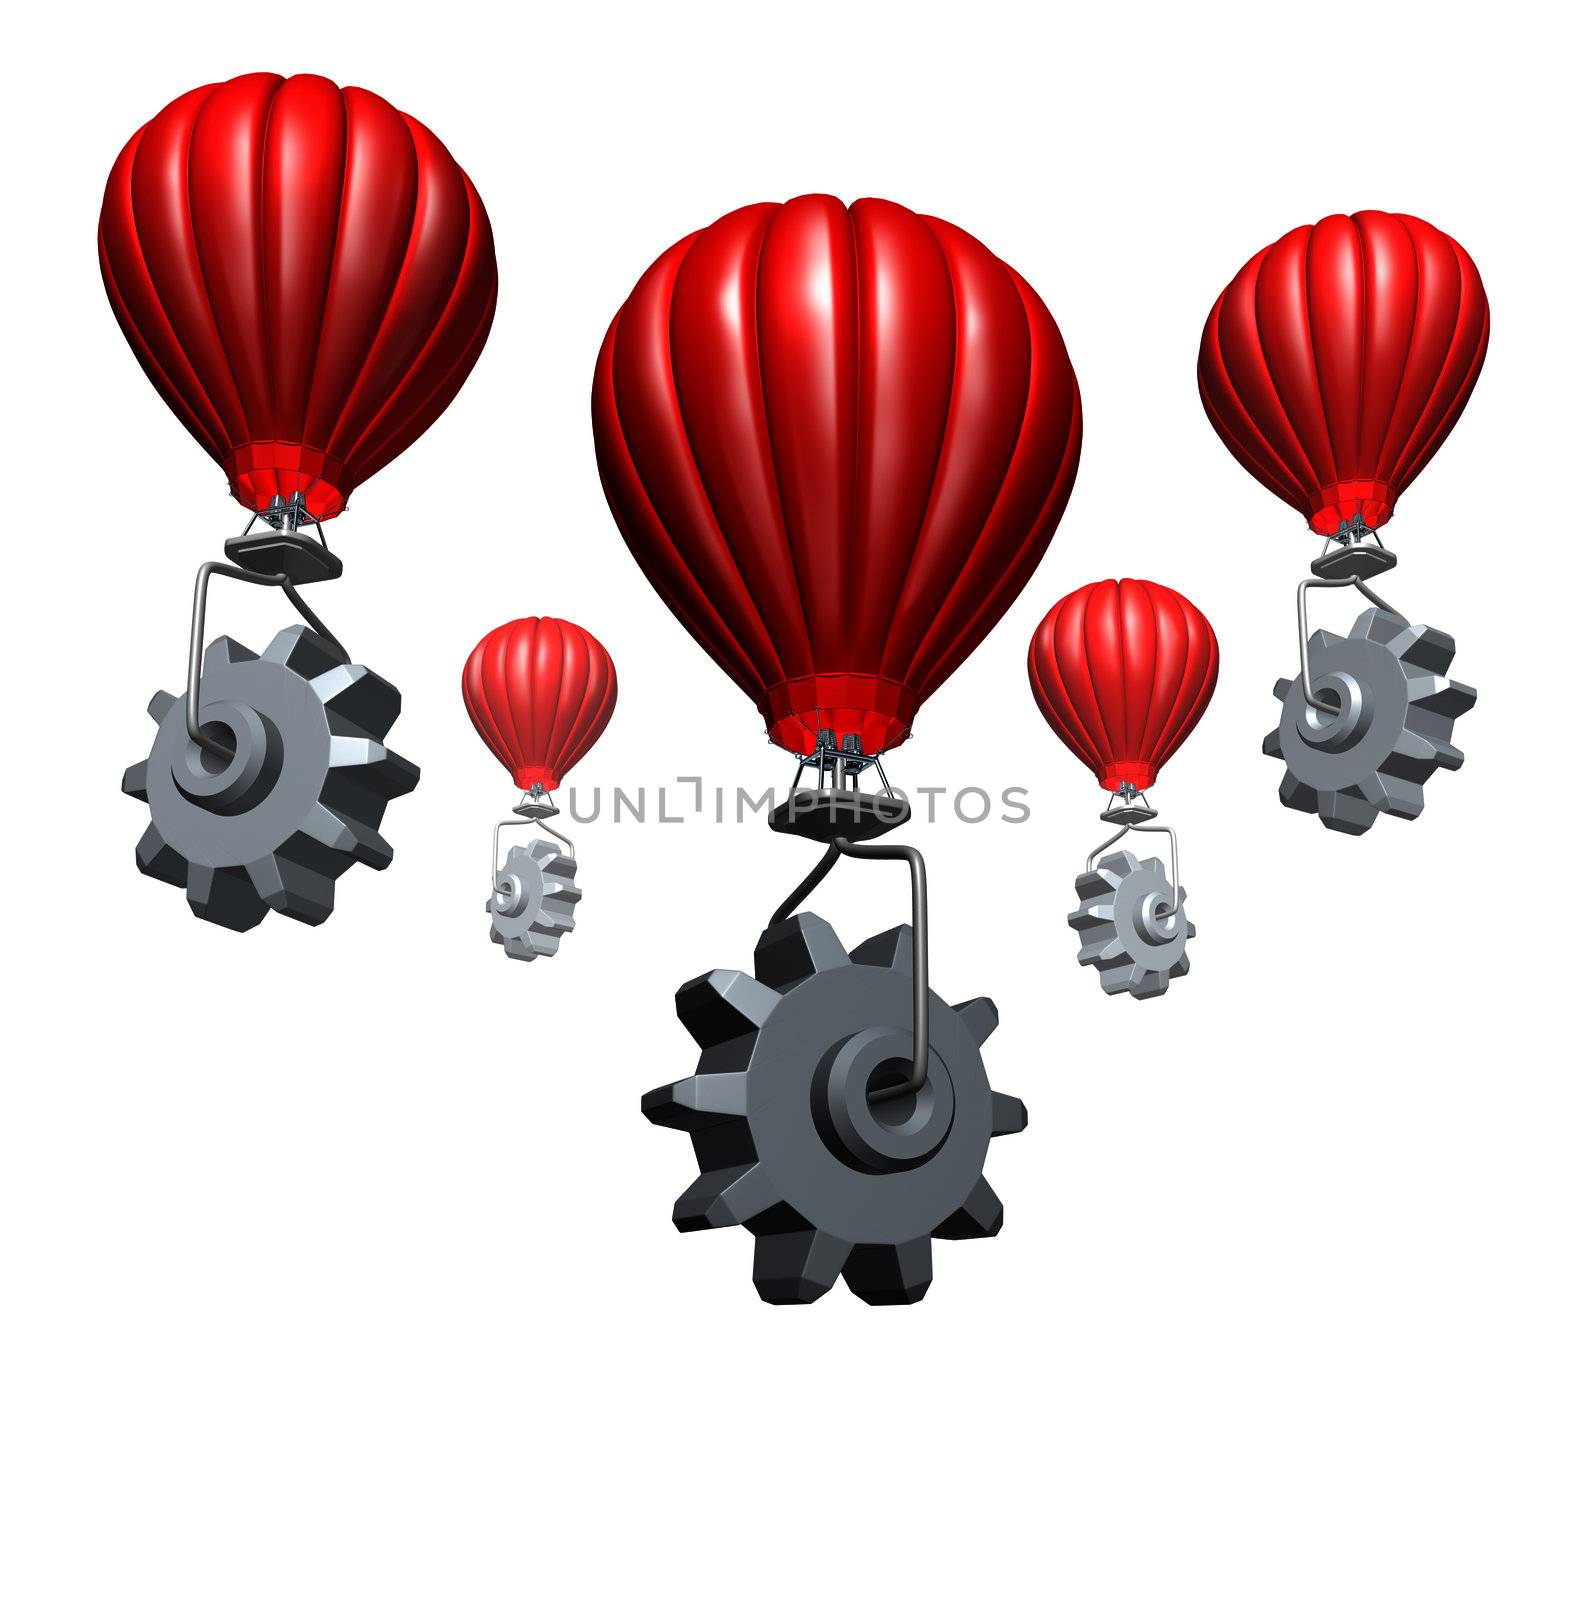 Cloud computing business and strategic partnership technology concept with hot air balloons with gears and cogs building a website or network of virtual servers for the internet on a white background.